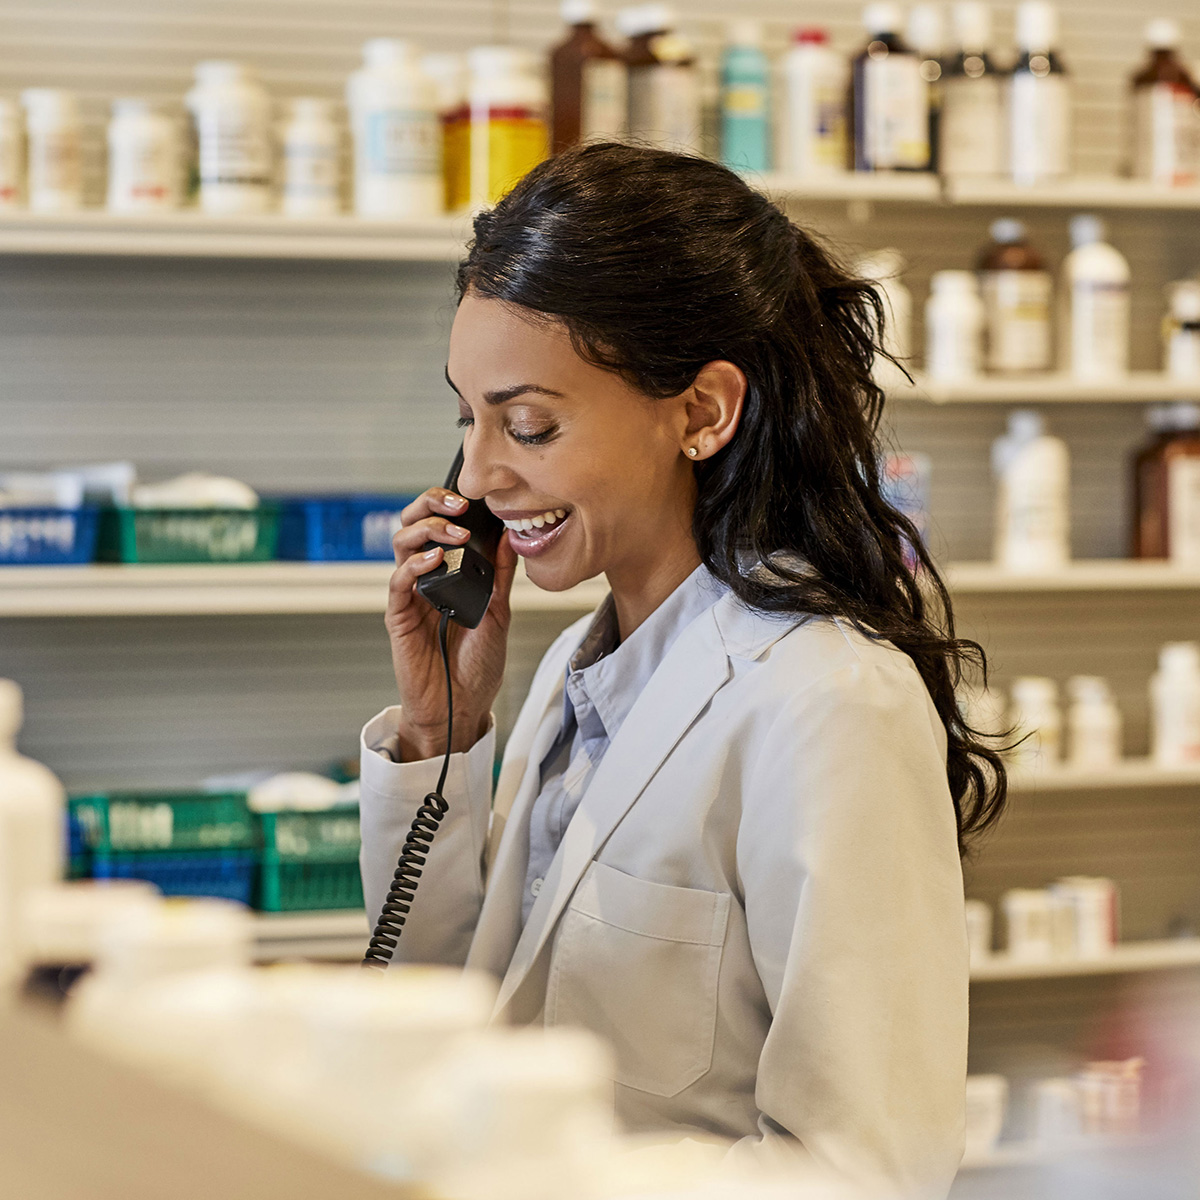 Pharmacist smiling while she talks on the phone.